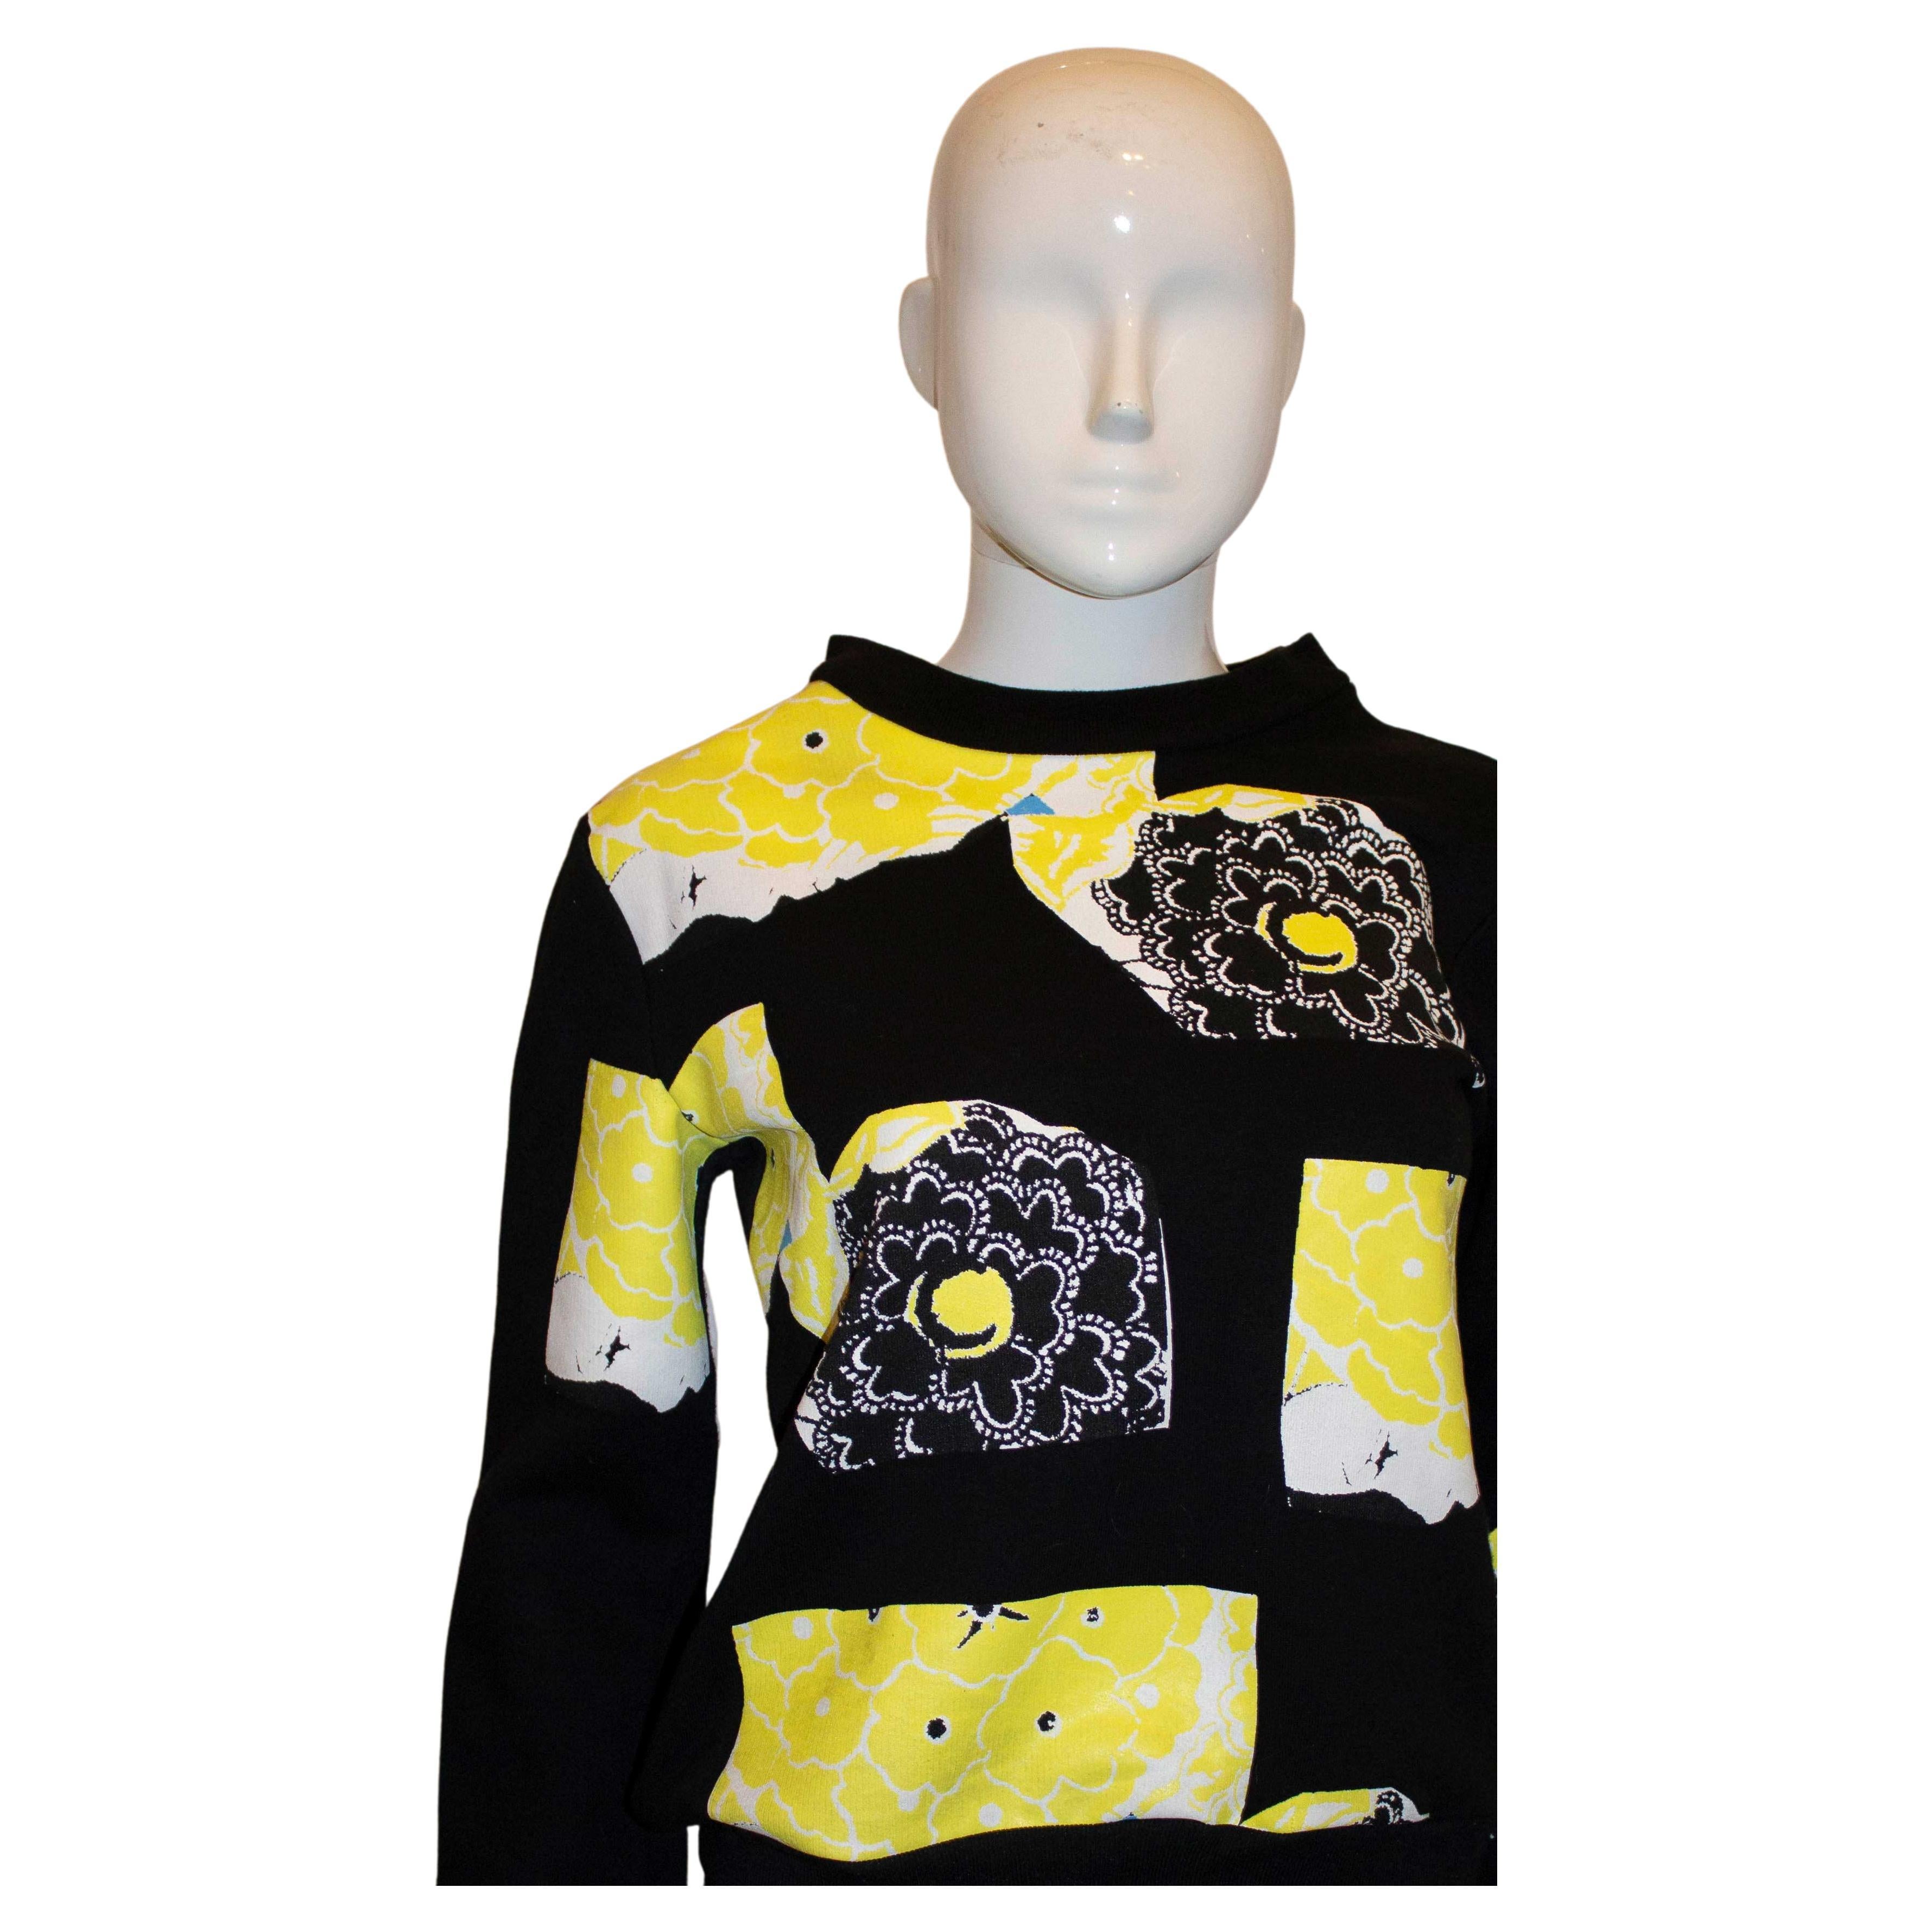 A colourful and easy to wear sweatshirt by Michael van der Ham. The top has a black background with a yellow, white and blue design. Size 8 Measurements: Bust up to 37'', length 22''